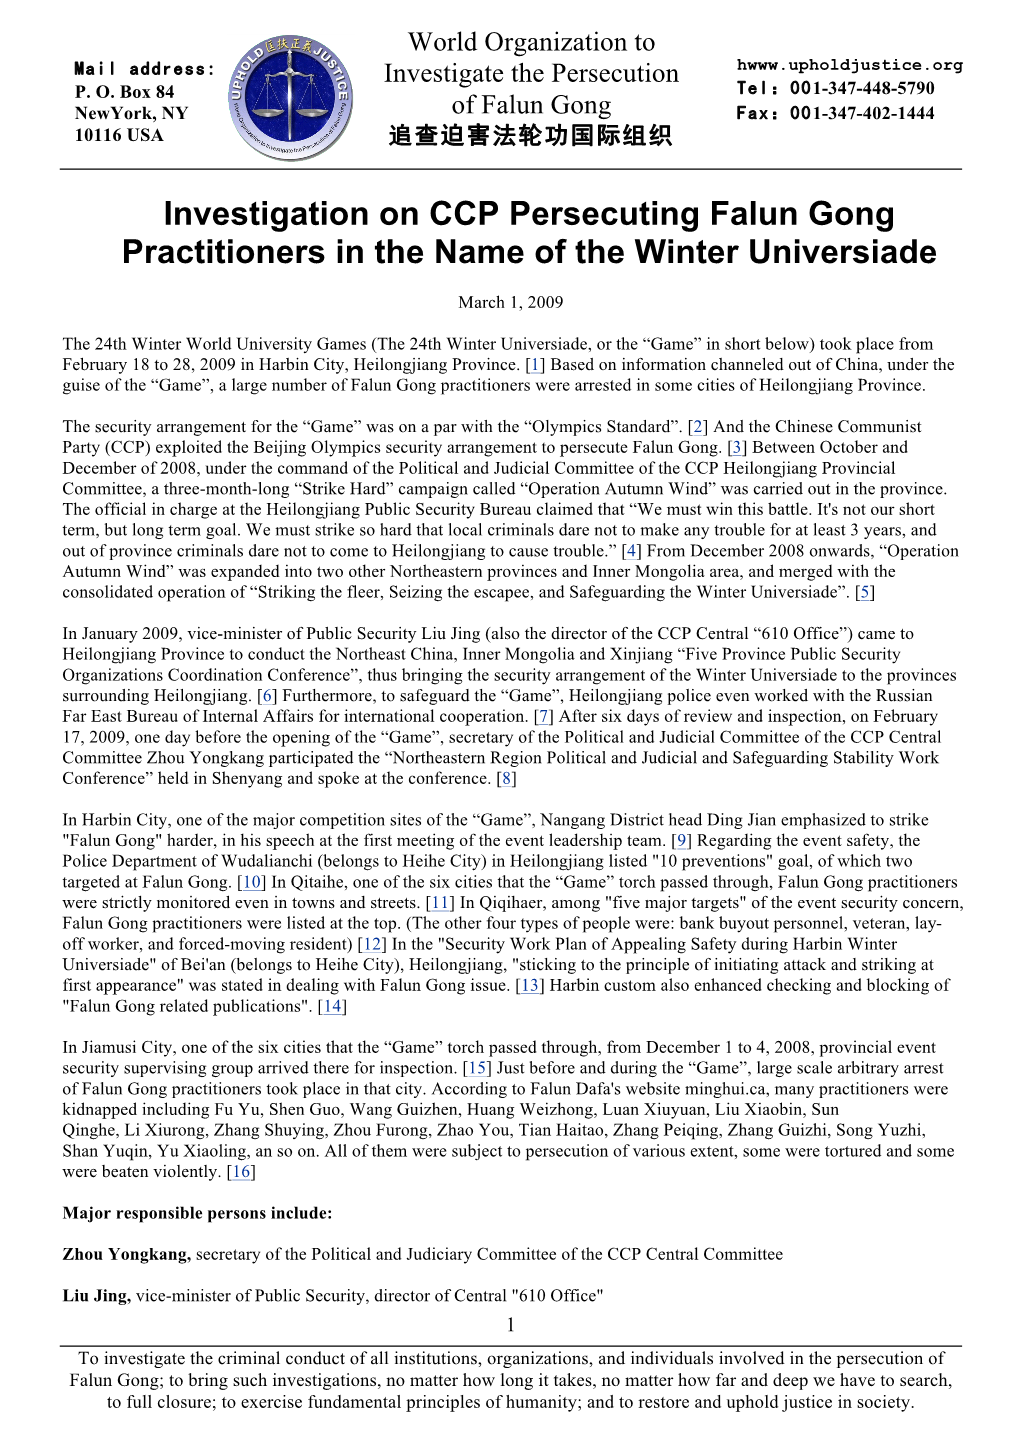 Investigation on CCP Persecuting Falun Gong Practitioners in the Name of the Winter Universiade